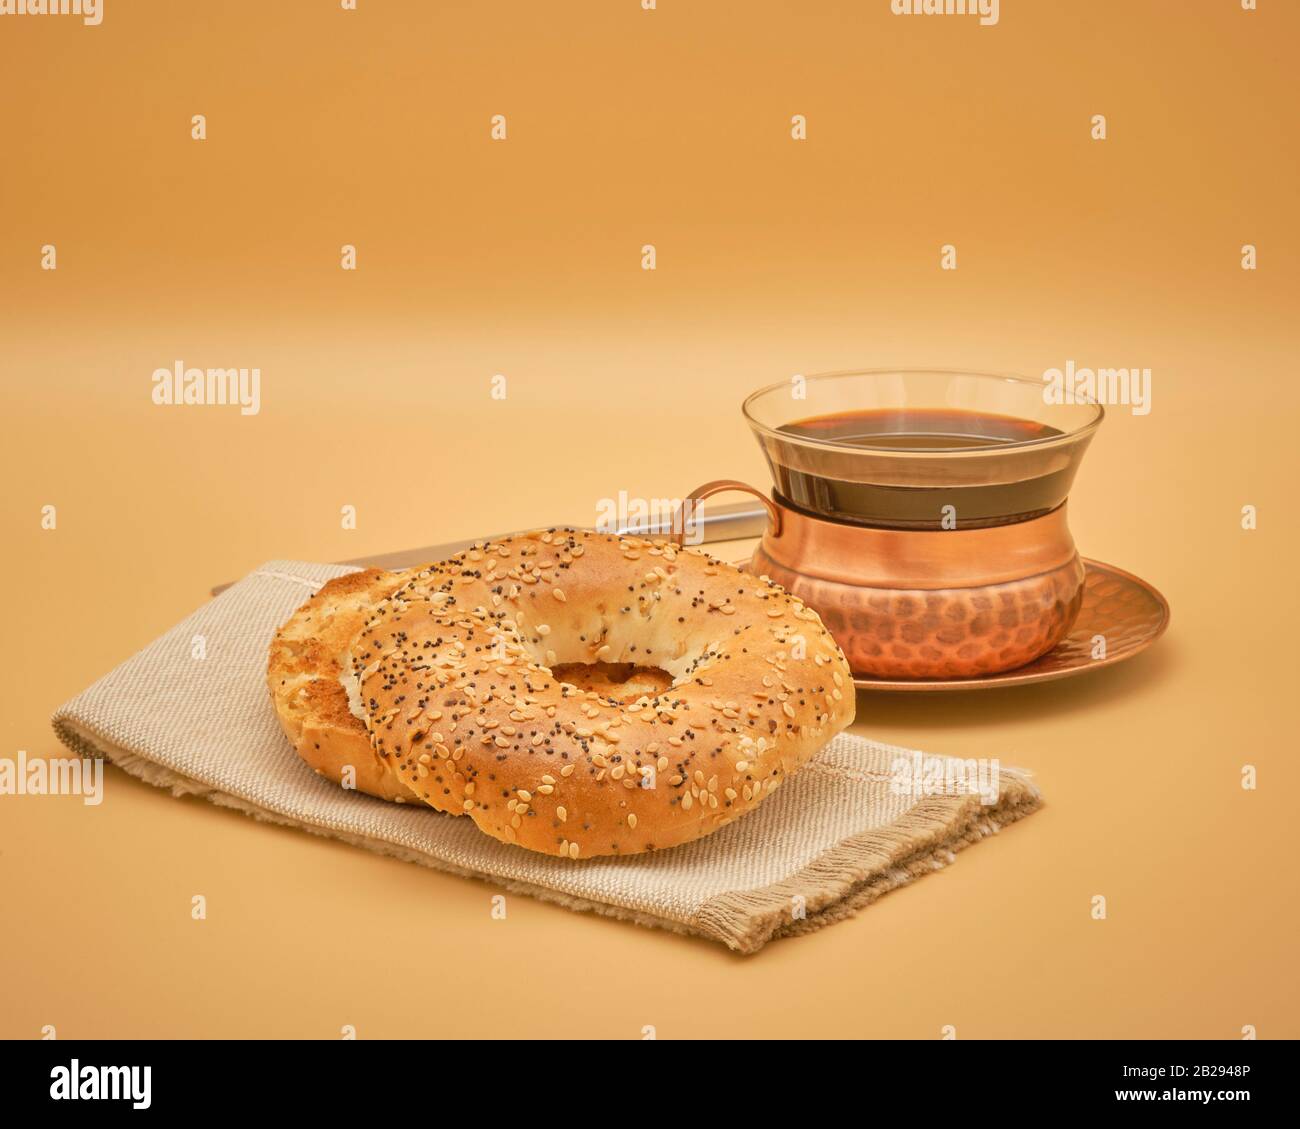 Variety of bagel commonly known as the everything bagel as it it a complex mix of ingredients and flavours is toasted and served with coffee. Stock Photo